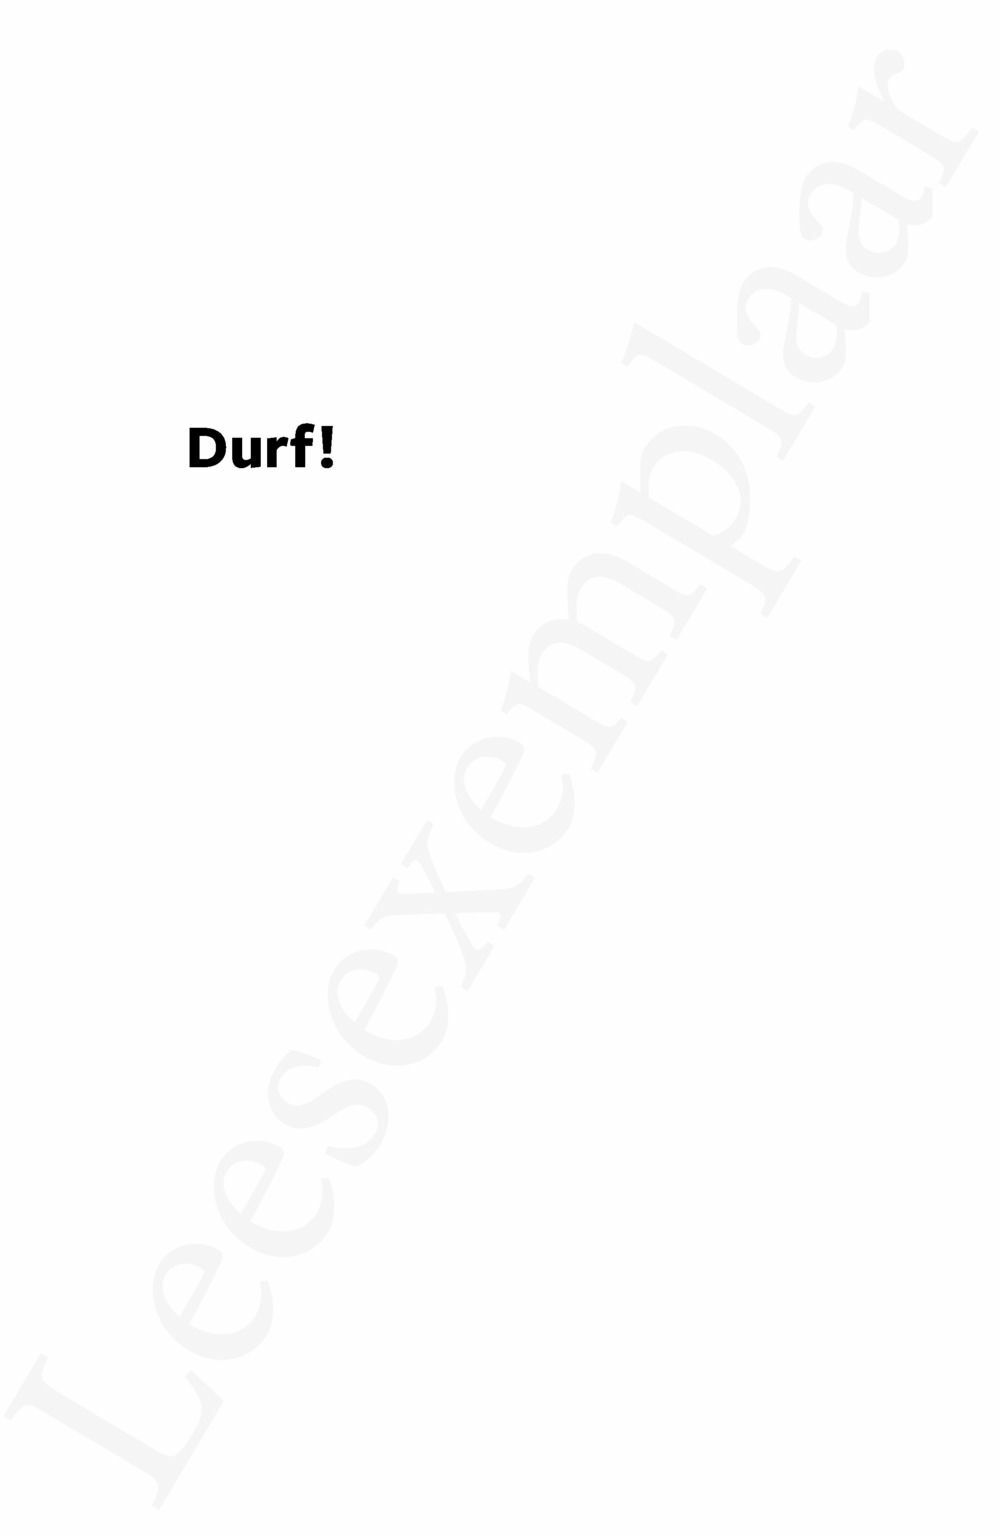 Preview: Durf!